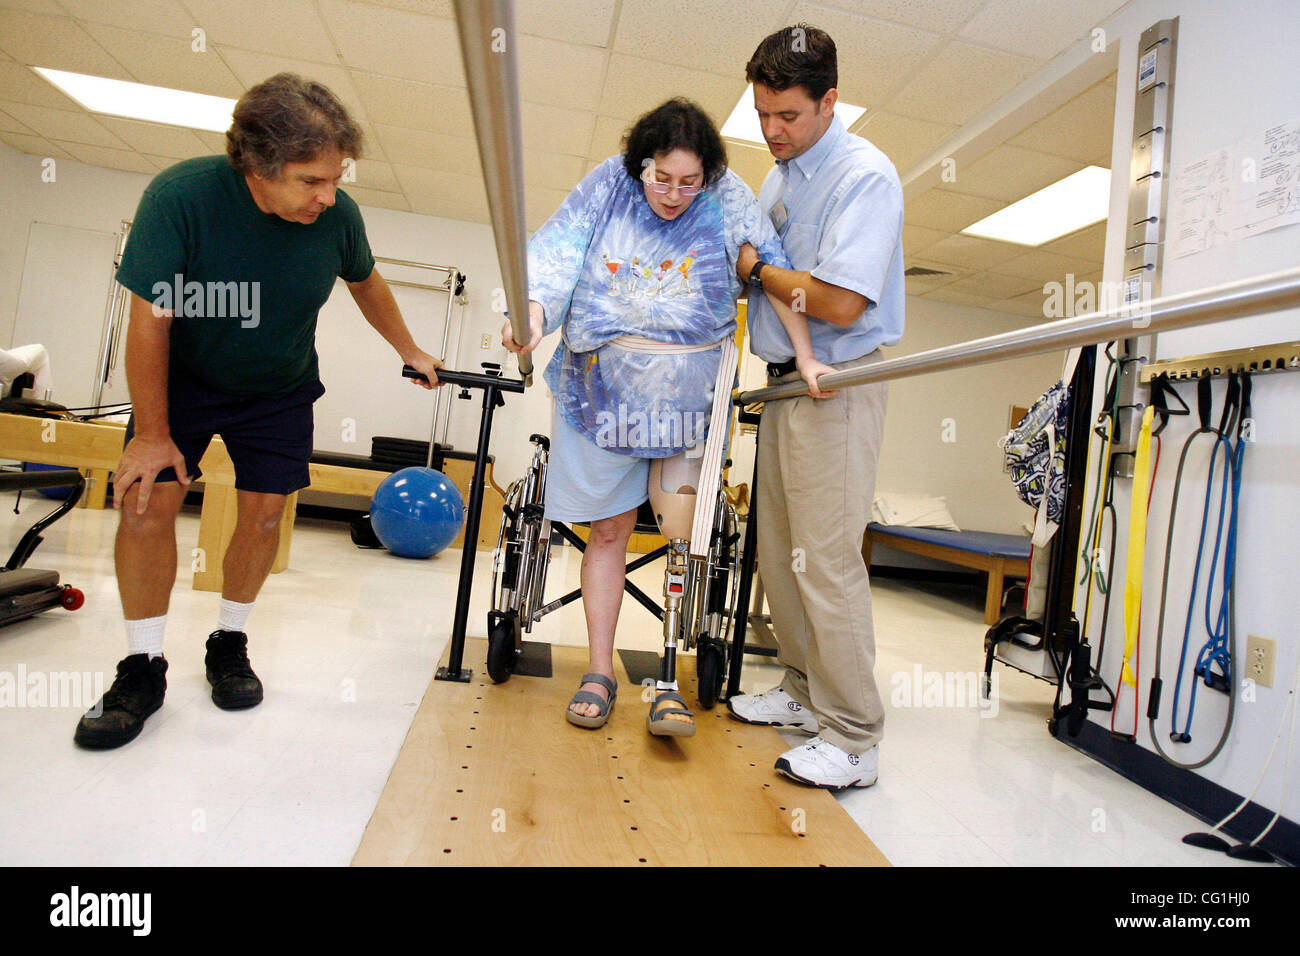 Aug 16, 2007 - Atlantis, FL, USA - Elissa Wehner walks on the parallel bars with the help of her physical therapist, Kenneth O' Sullivan, while her husband, Tom Wehner looks on.  Elissa Wehner goes to rehabilitative therapy at JFK hospital's outpatient facility on August 16, 2007. (Credit Image: © J Stock Photo